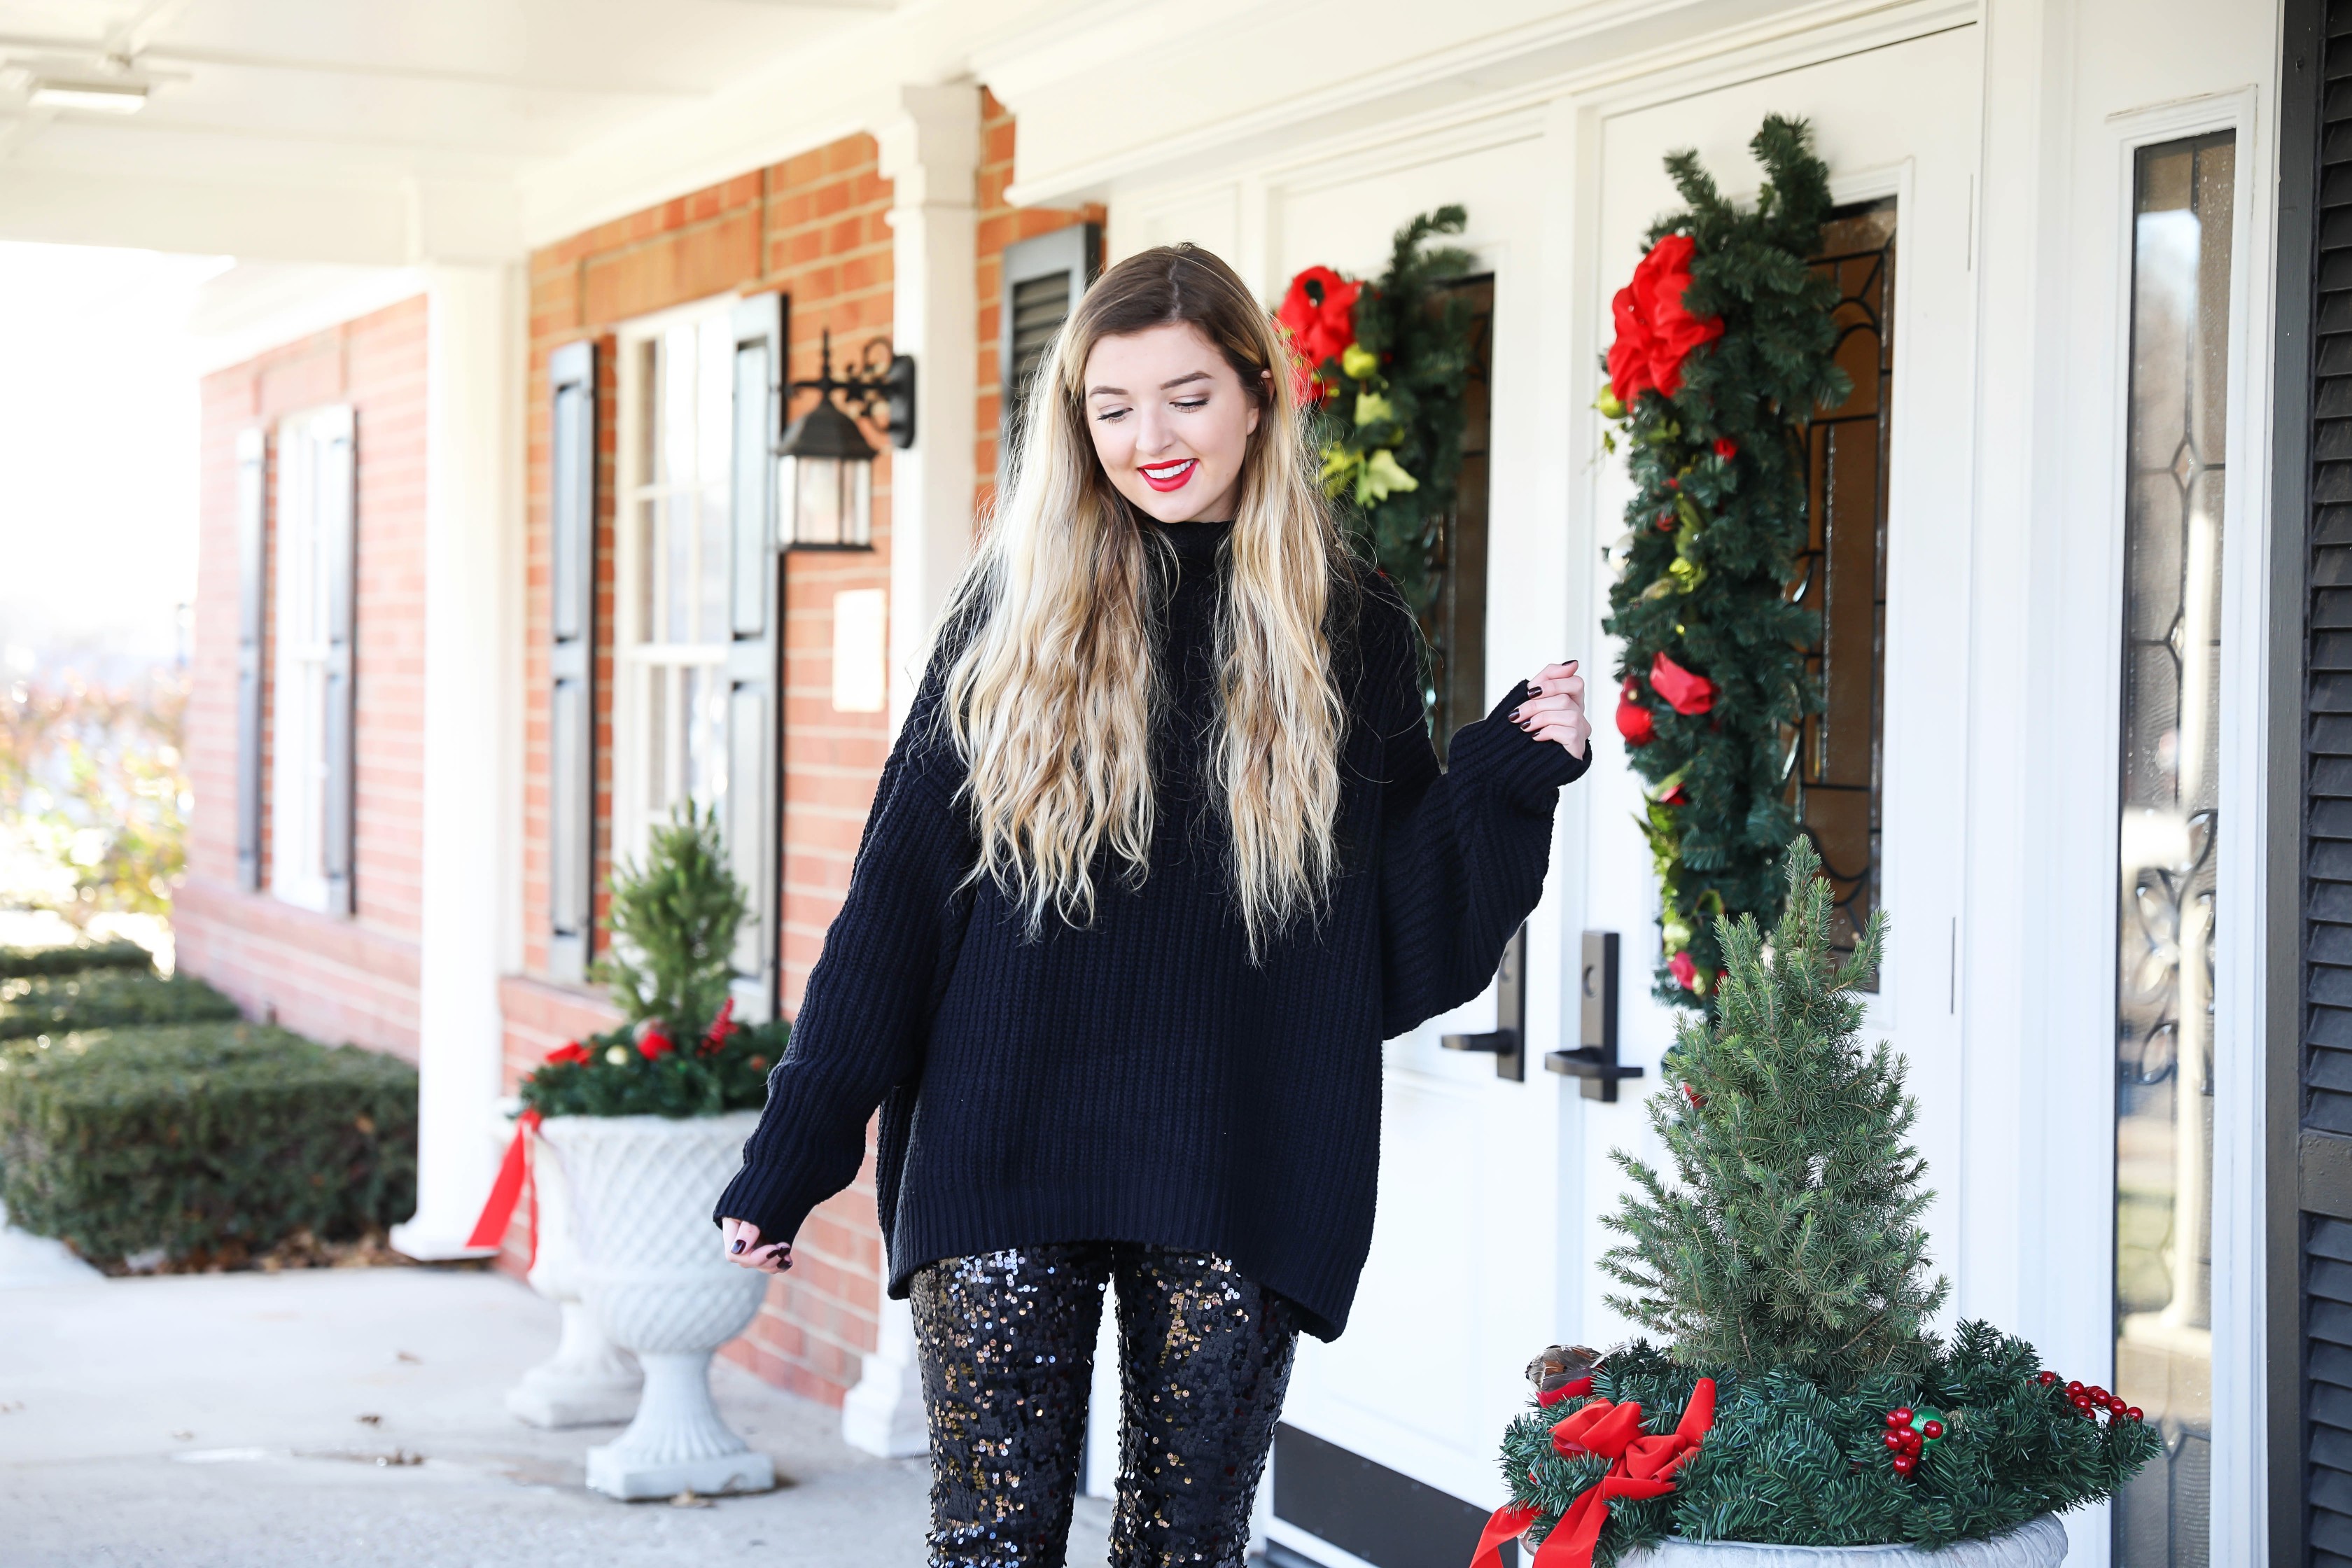 https://dailydoseofcharm.com/wp-content/uploads/2017/12/New-Years-eve-outfit-idea-sequin-pants-how-to-style-sequin-pants-for-nye-fashio-blog-daily-dose-of-charm-lauren-lindmark-4P6A7222.jpg